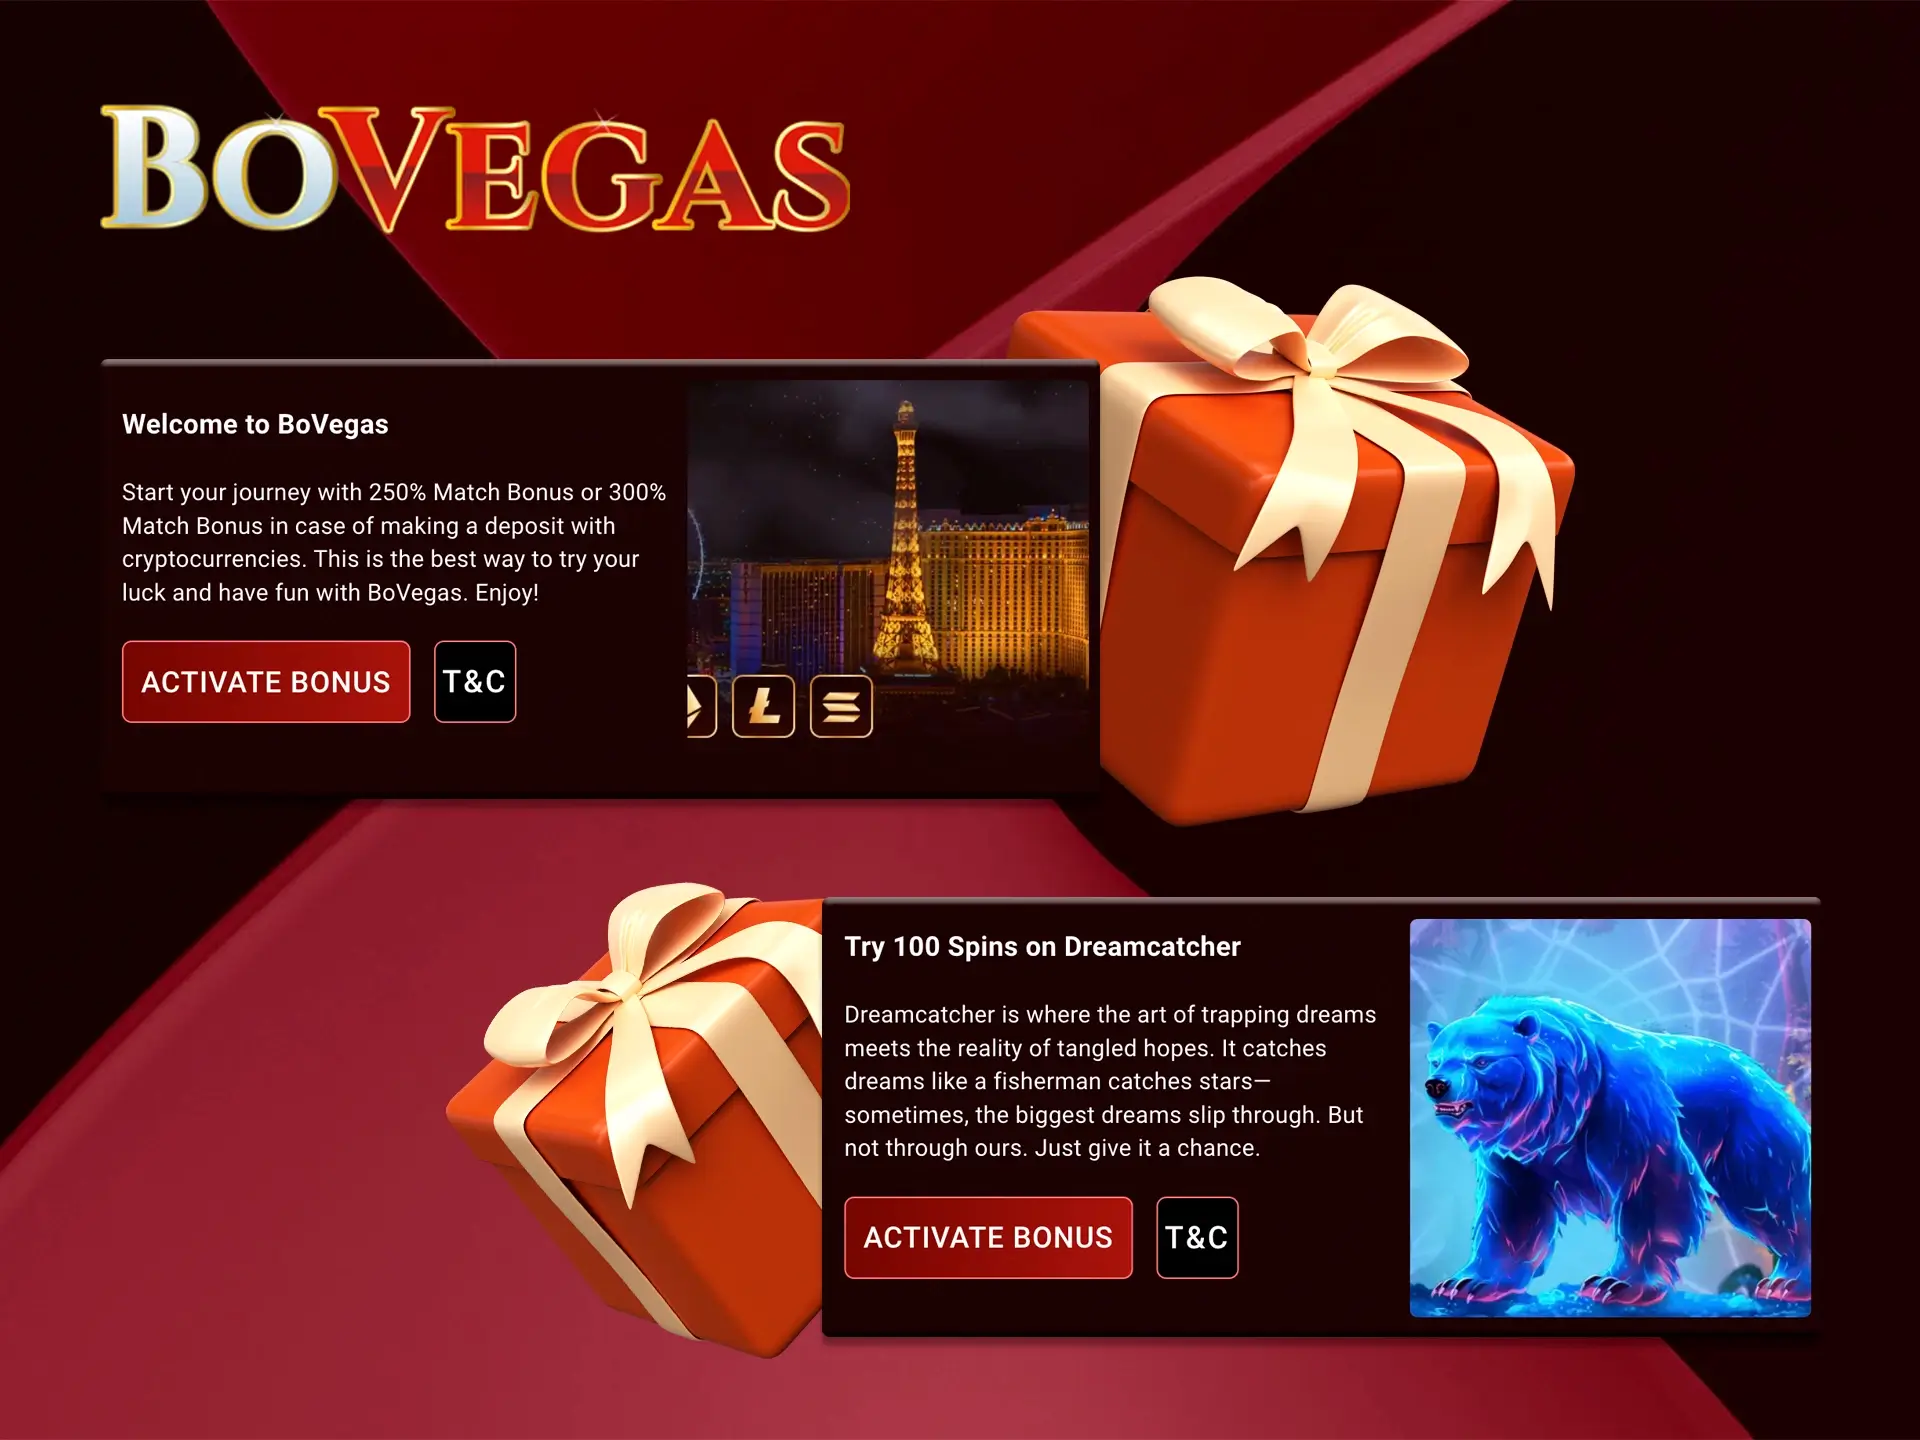 BoVegas Casino's poker bonus programme will get you off to a good start and increase your deposit significantly.